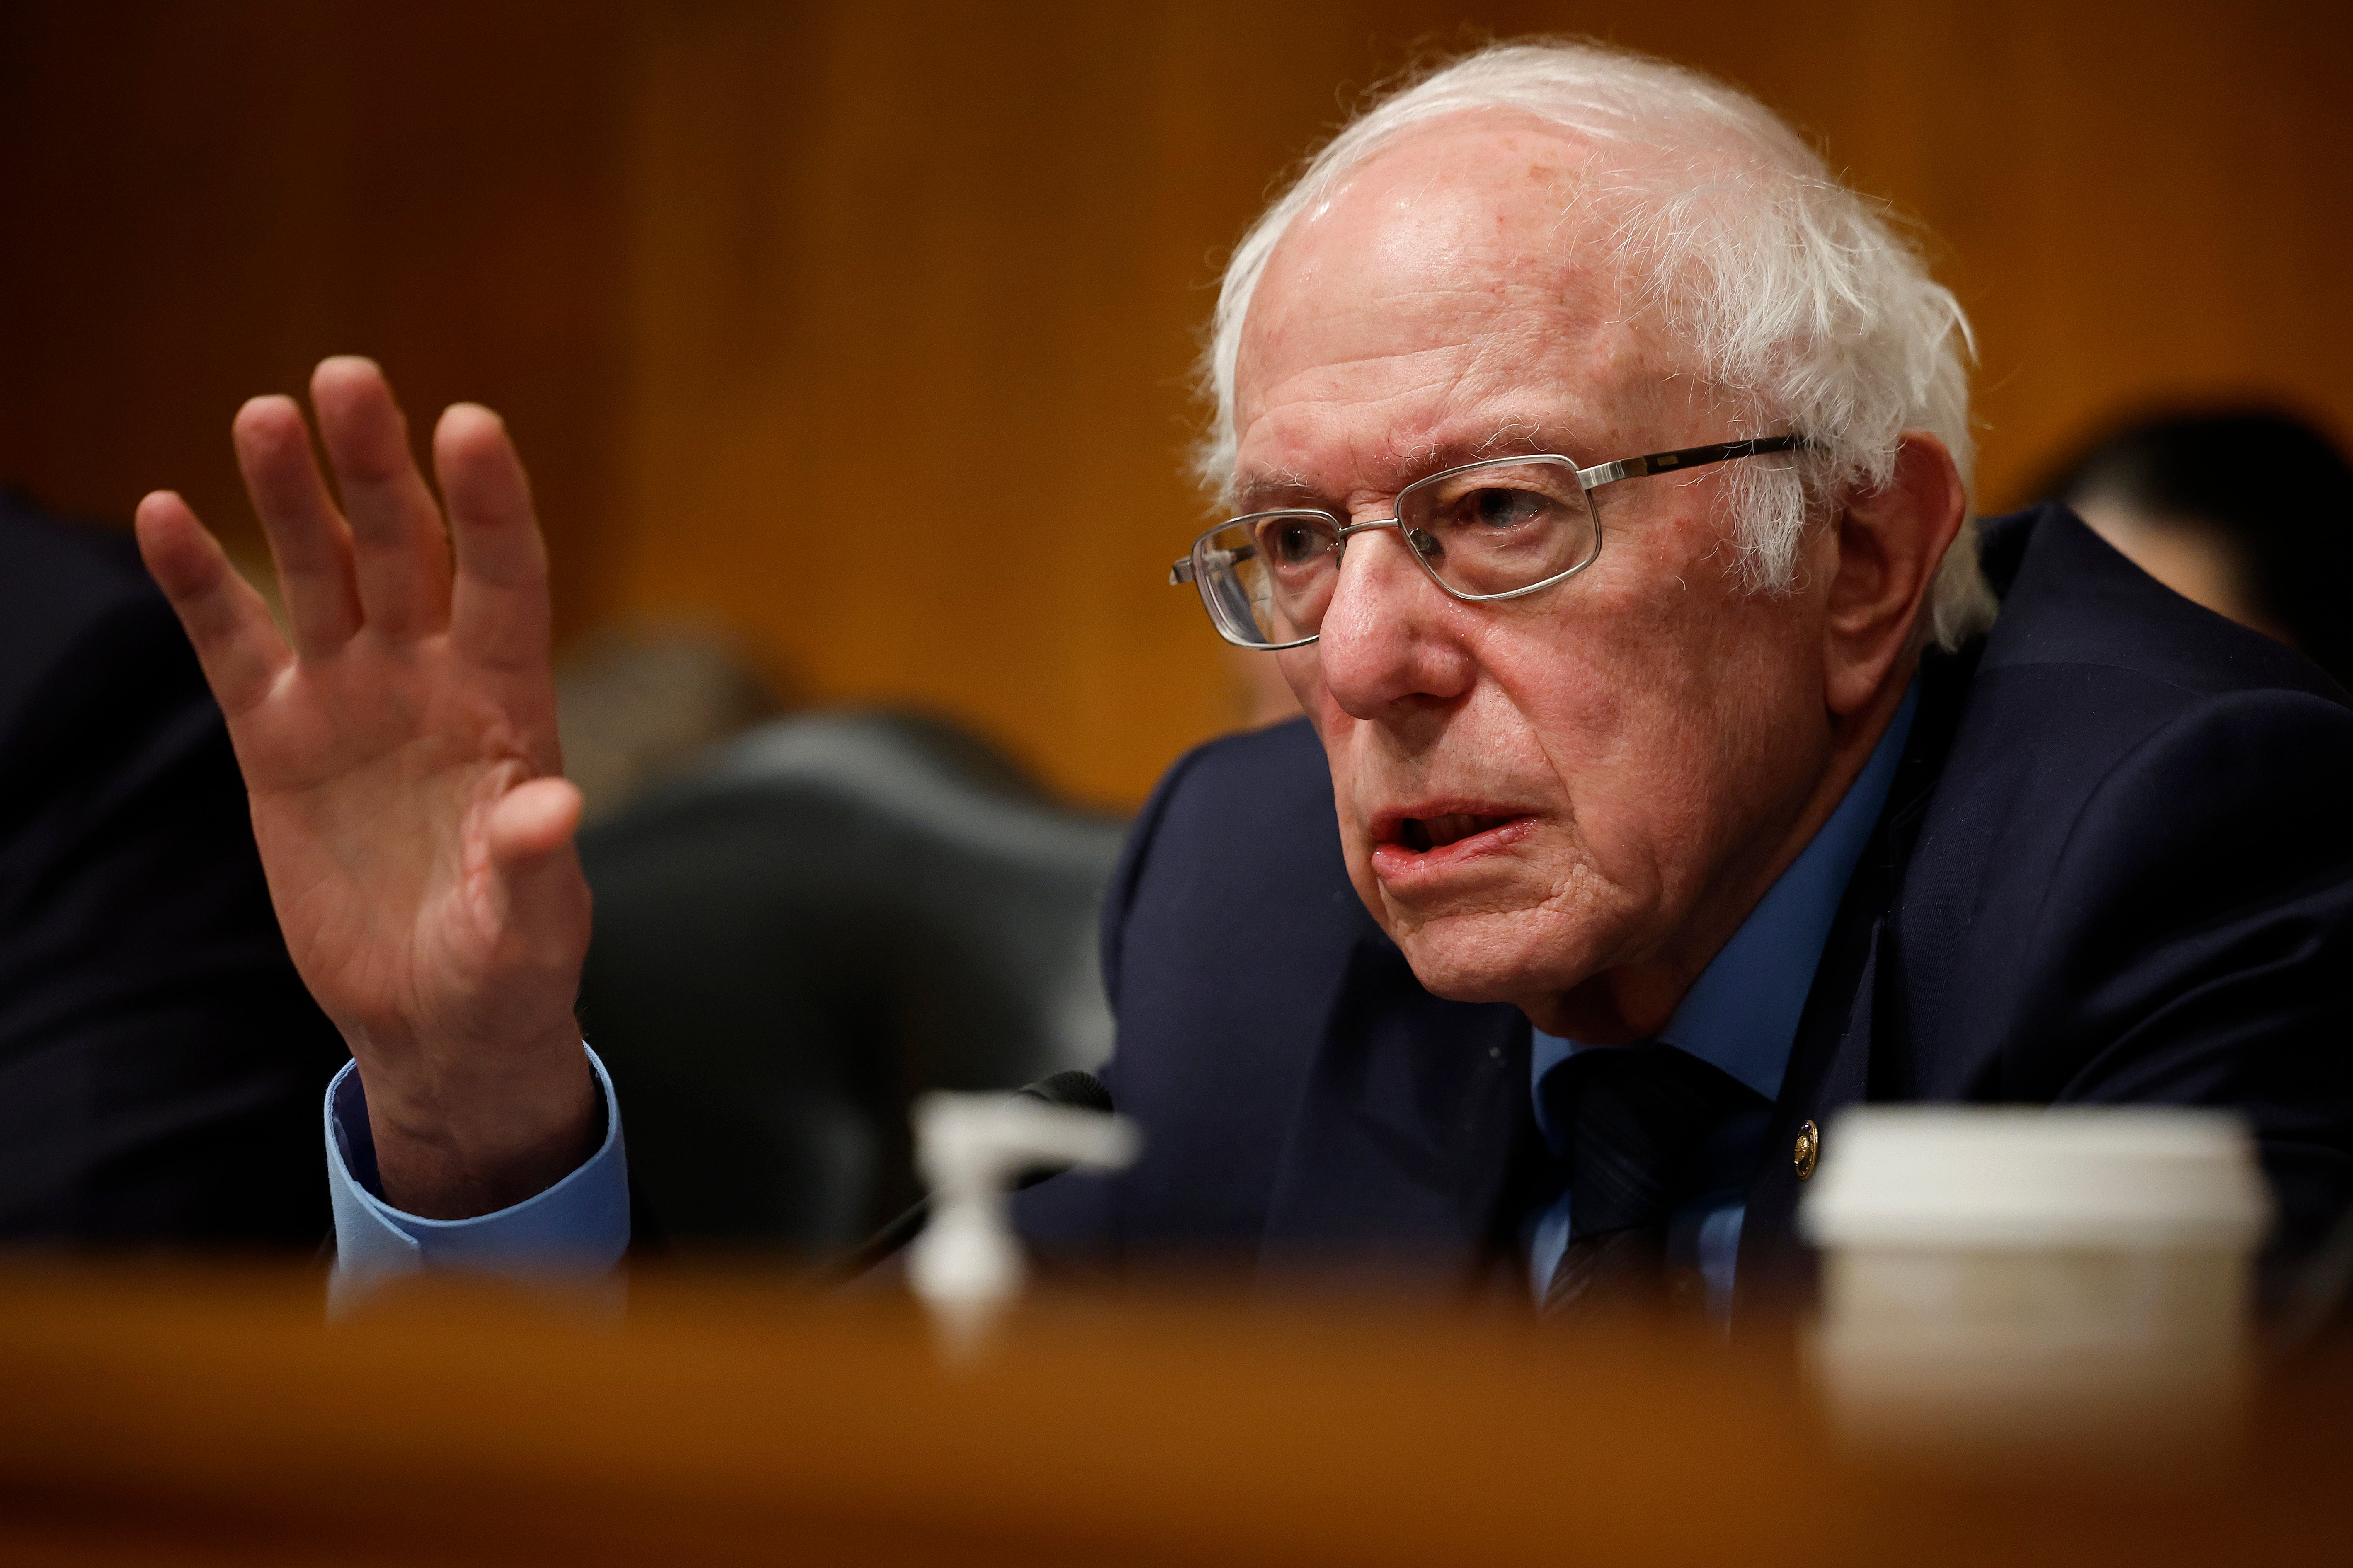 Bernie Sanders has previously criticised Israel’s attacks on Gaza